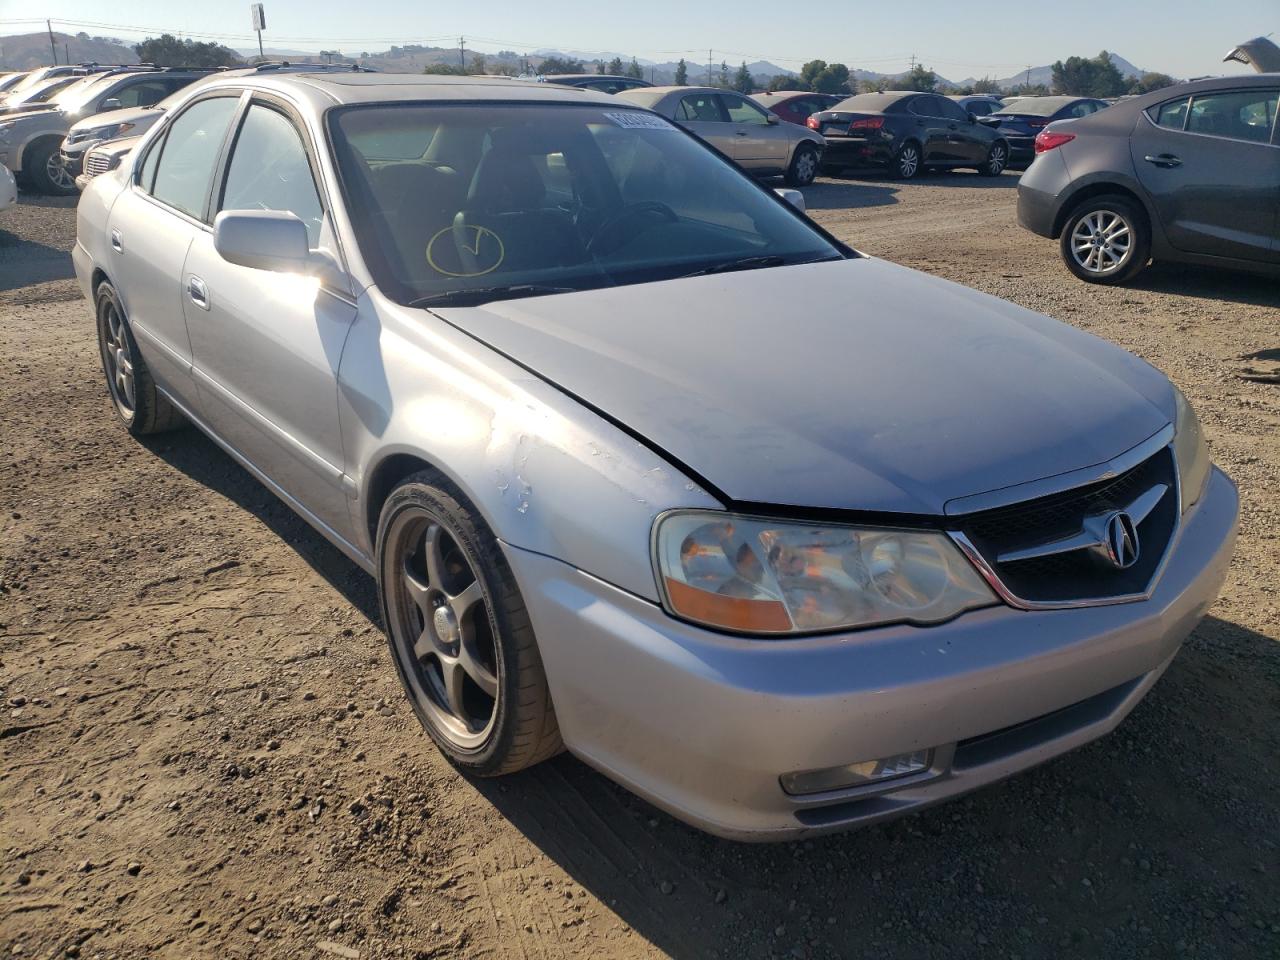 2002 ACURA 3.2TL TYPE-S VIN: 19UUA56922A028012